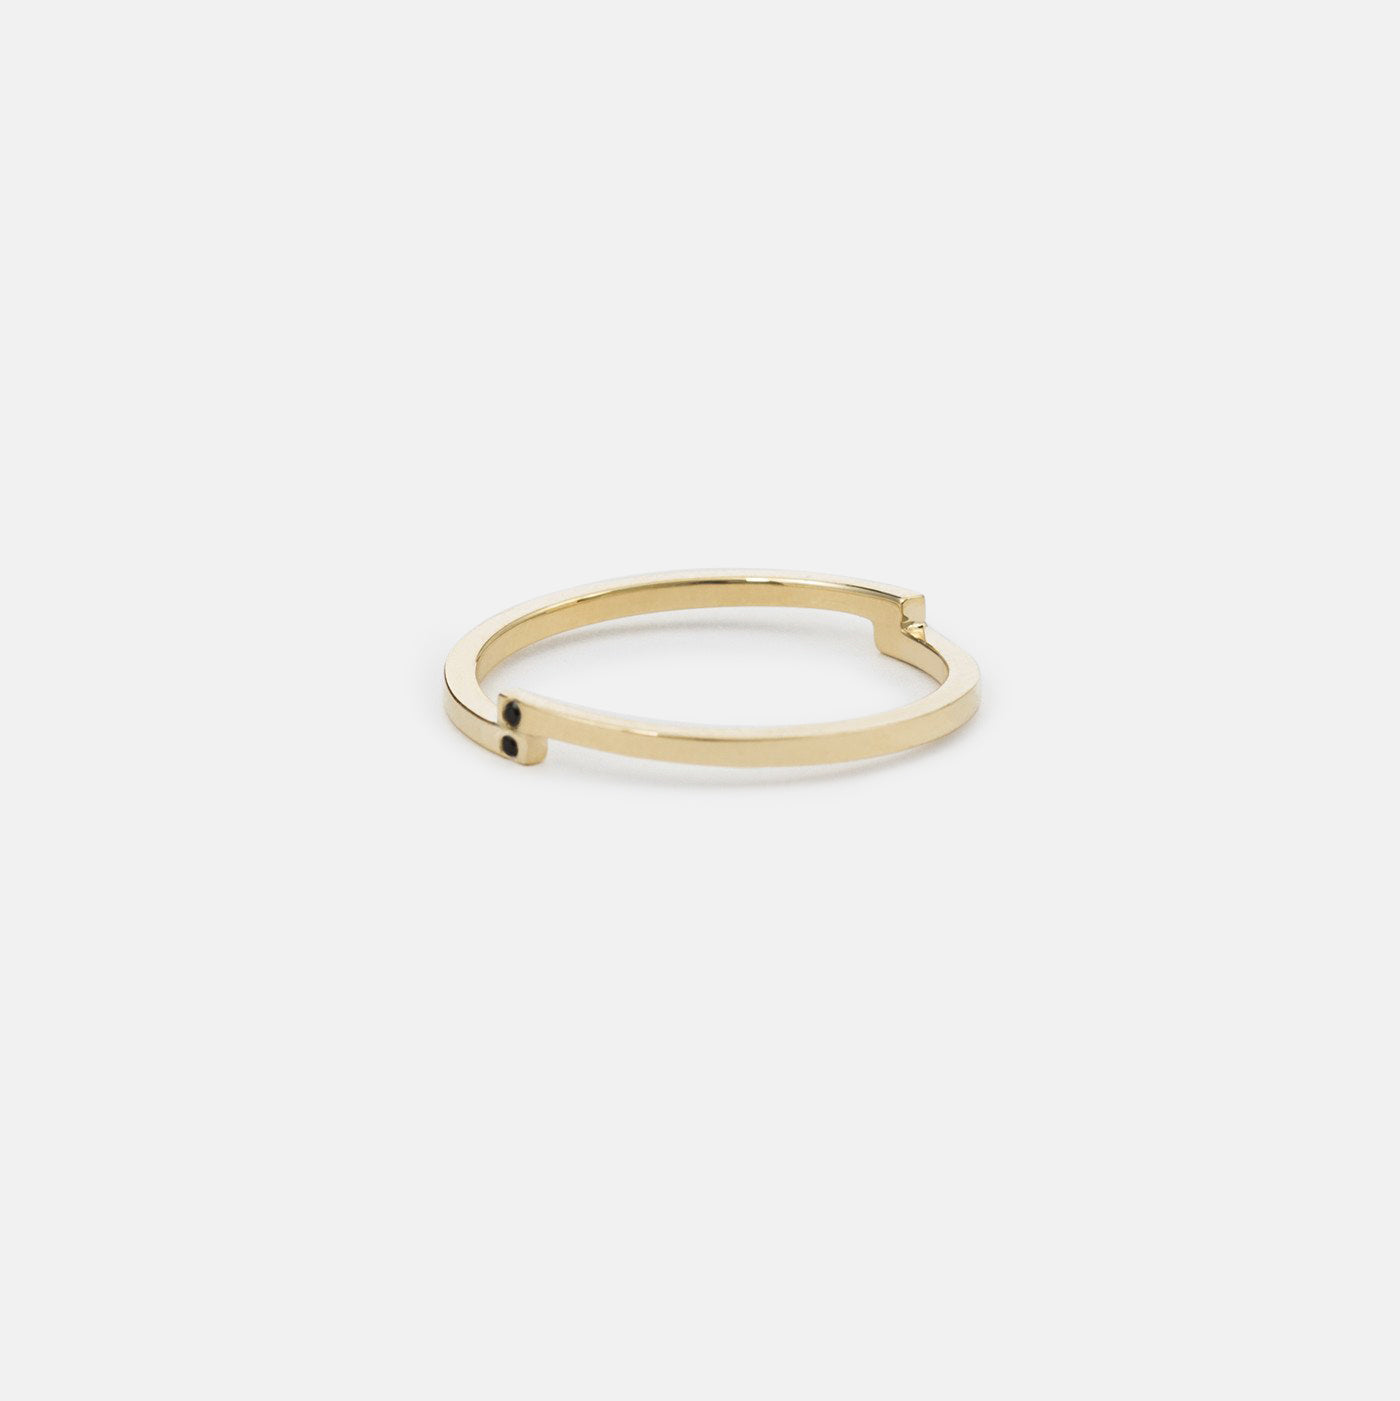 Pili Simple Ring in 14k Gold set with White and Black Diamonds By SHW Fine Jewelry NYC